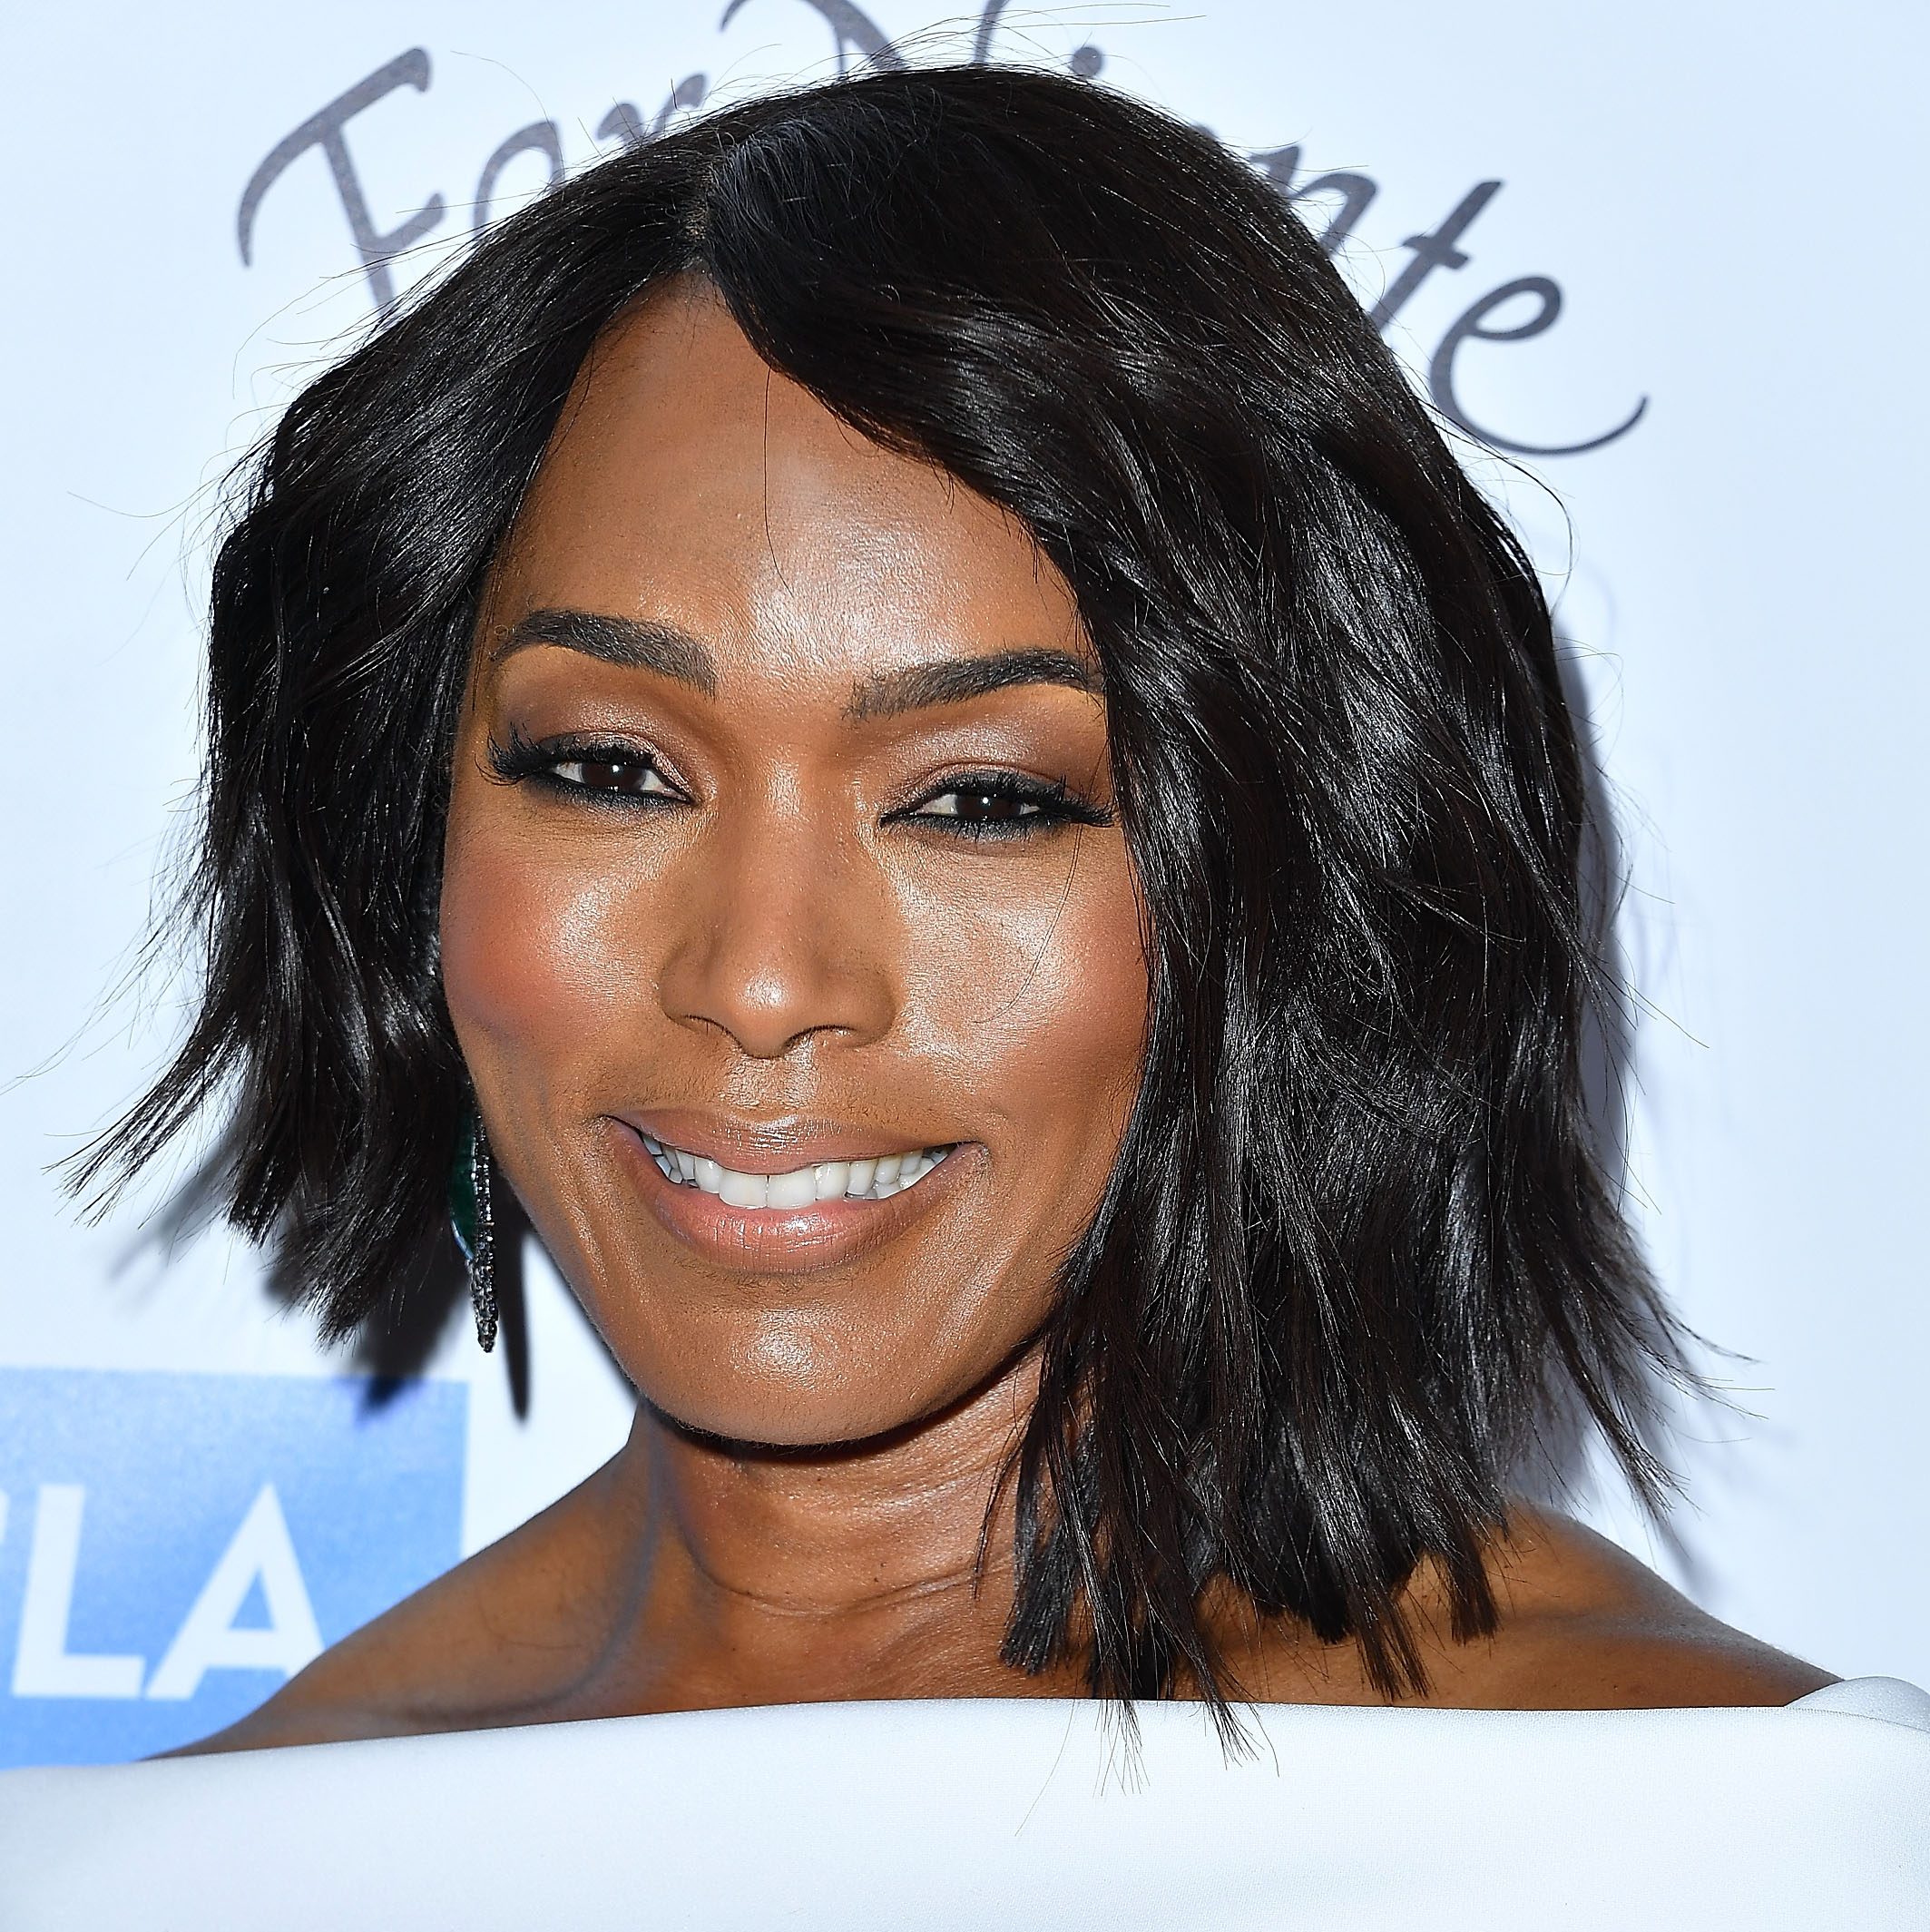 Angela Basset with a shoulder-length haircut that's shorter on one side and longer on the other side